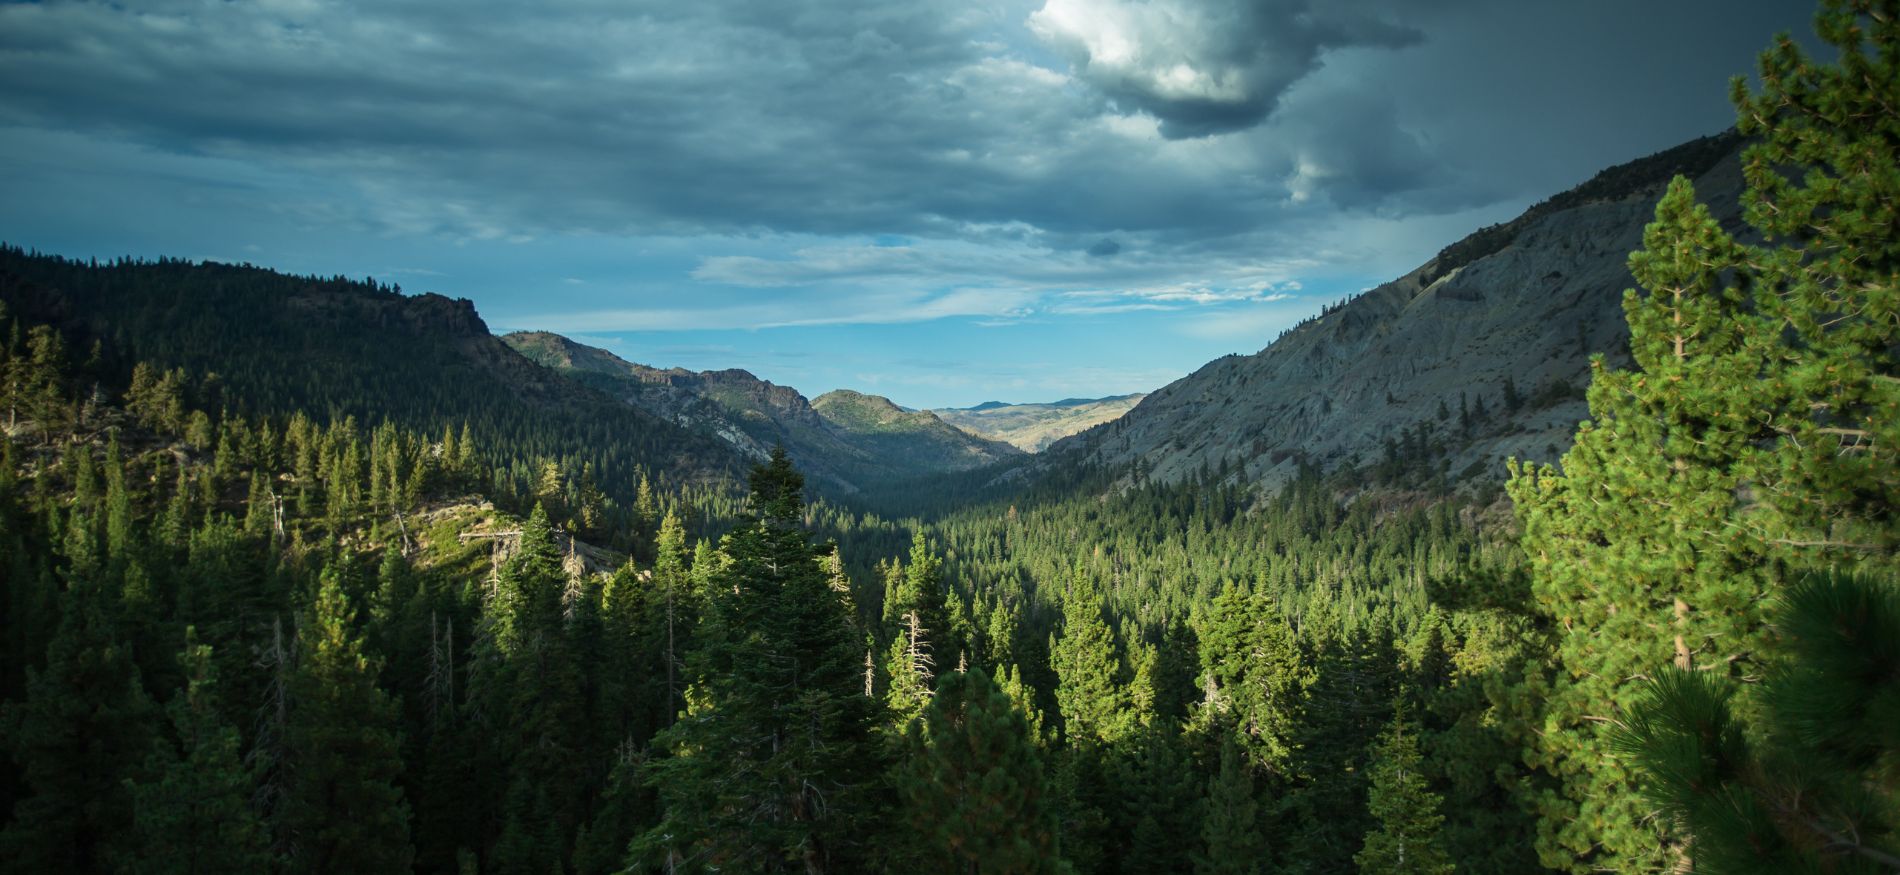 View of a forested valley in the Stanislaus forest